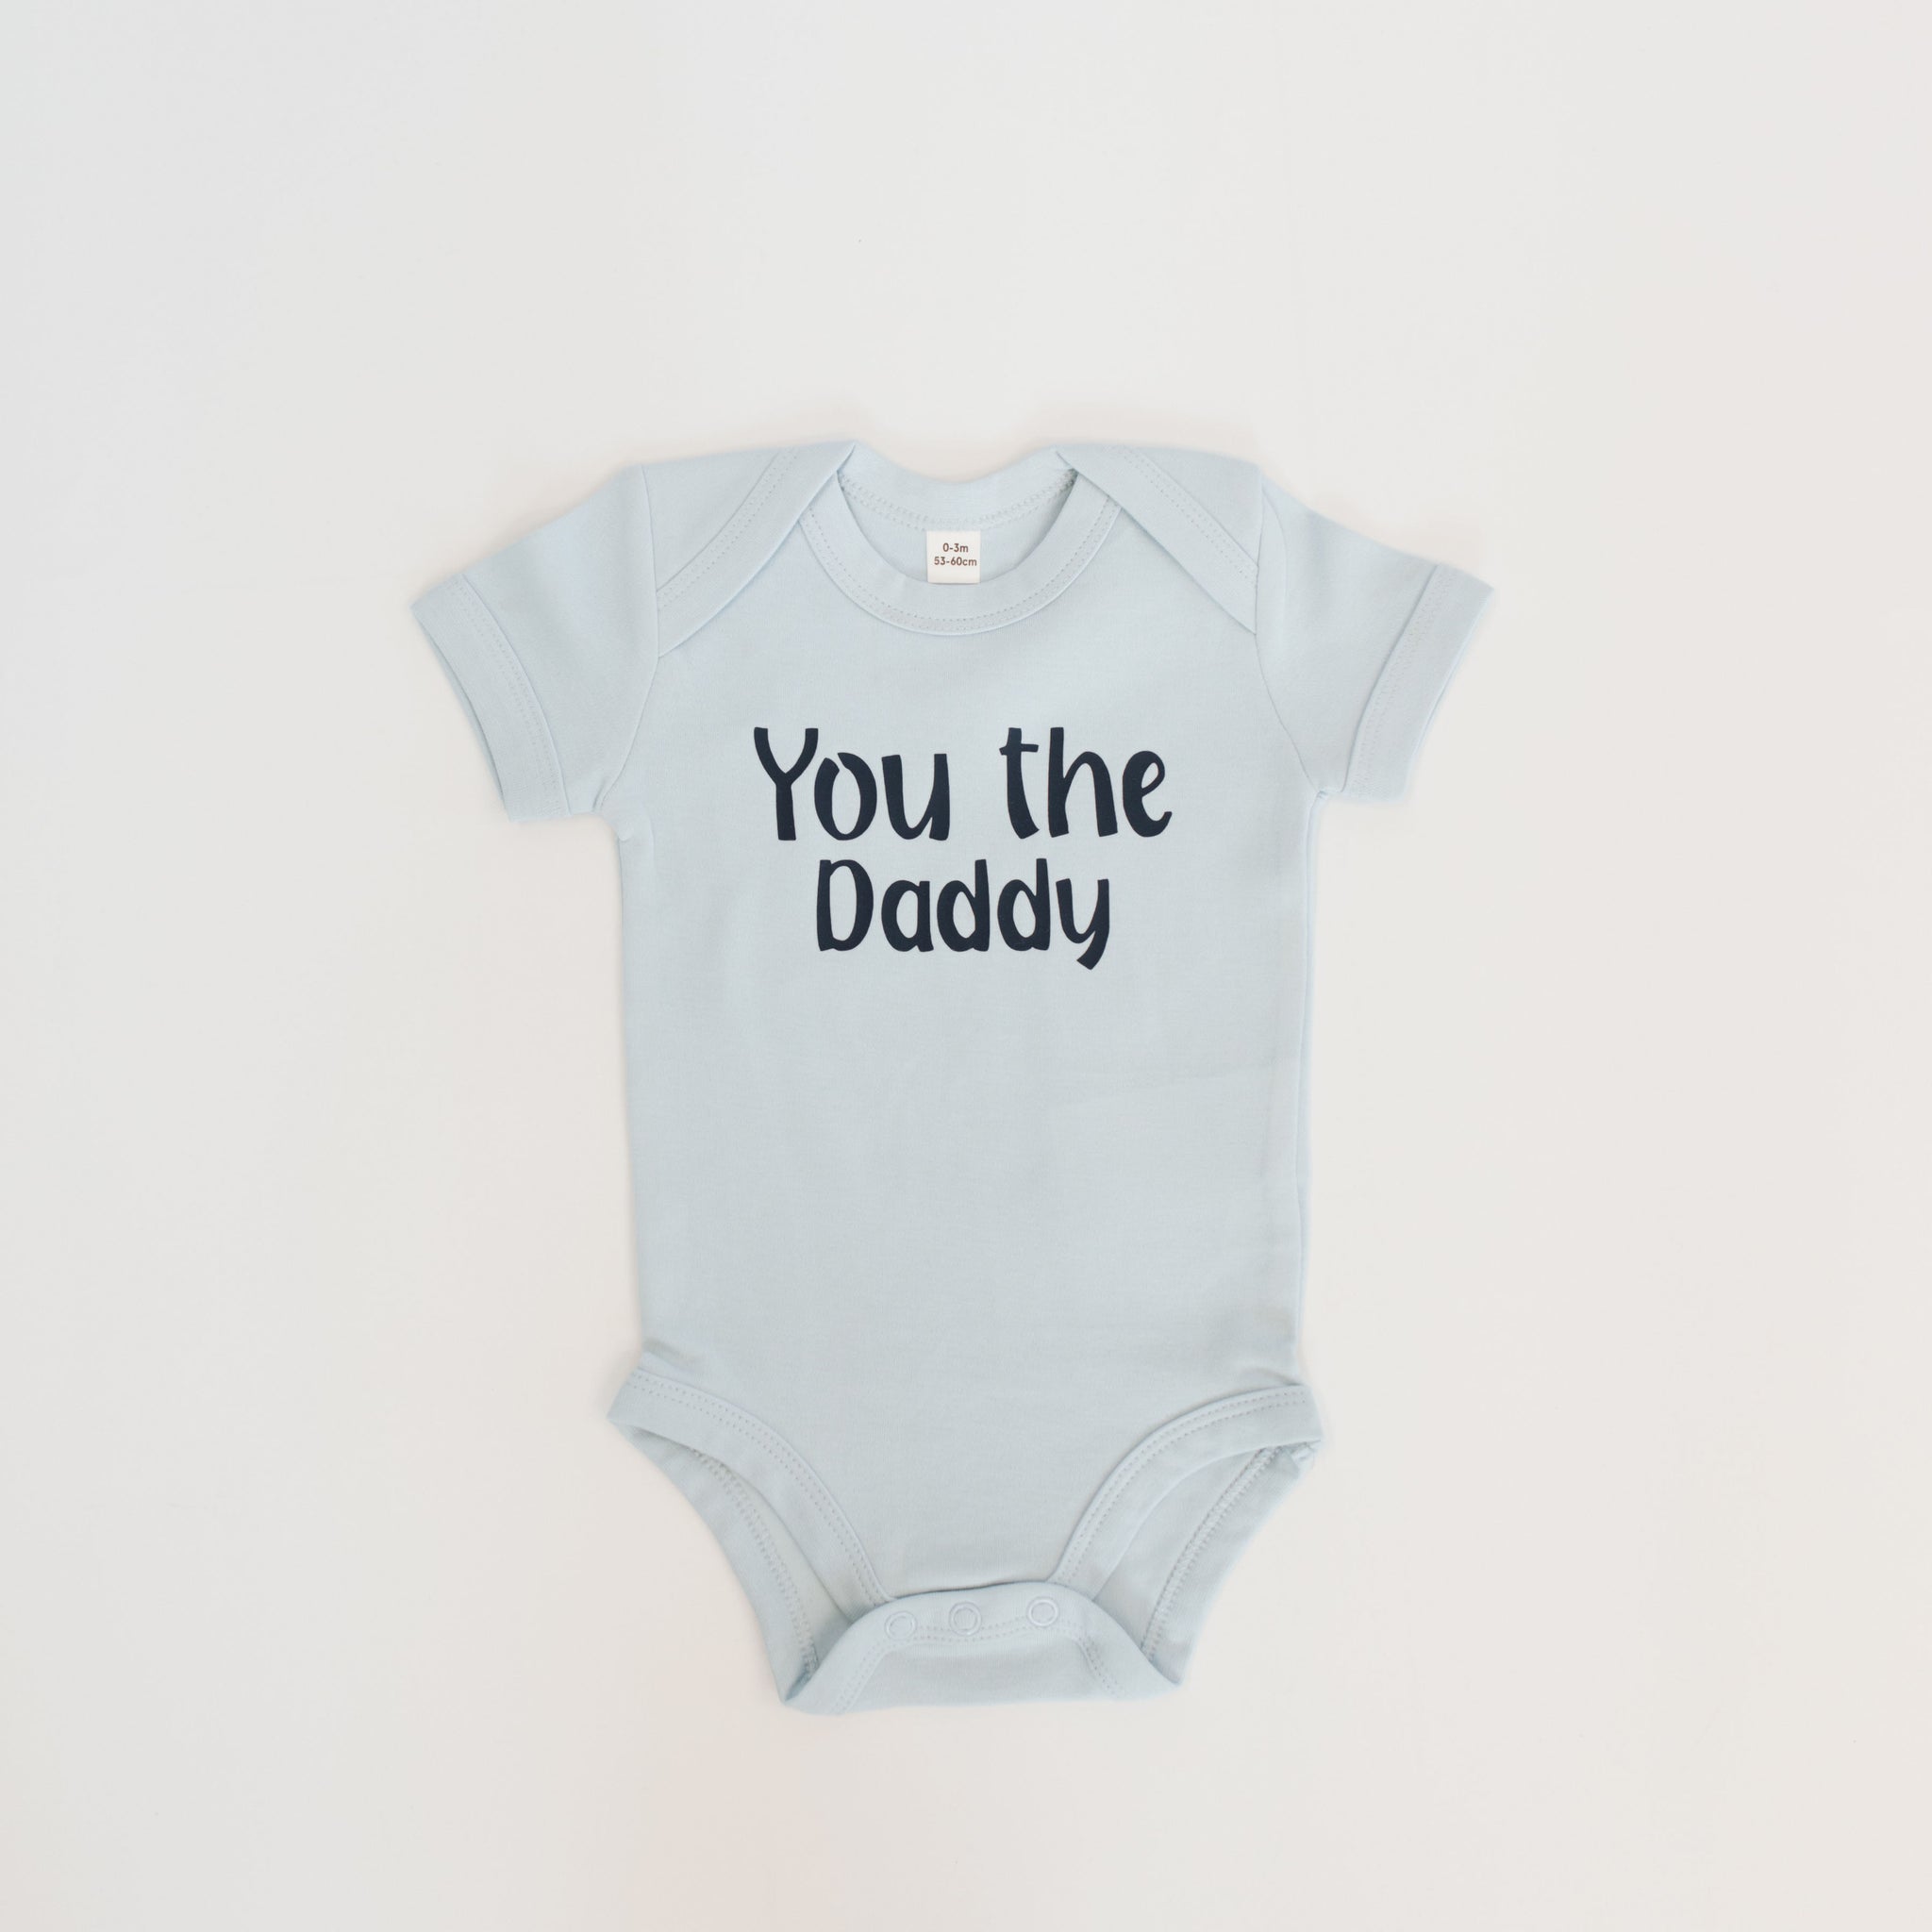 You The Daddy Baby/Kids T-shirt